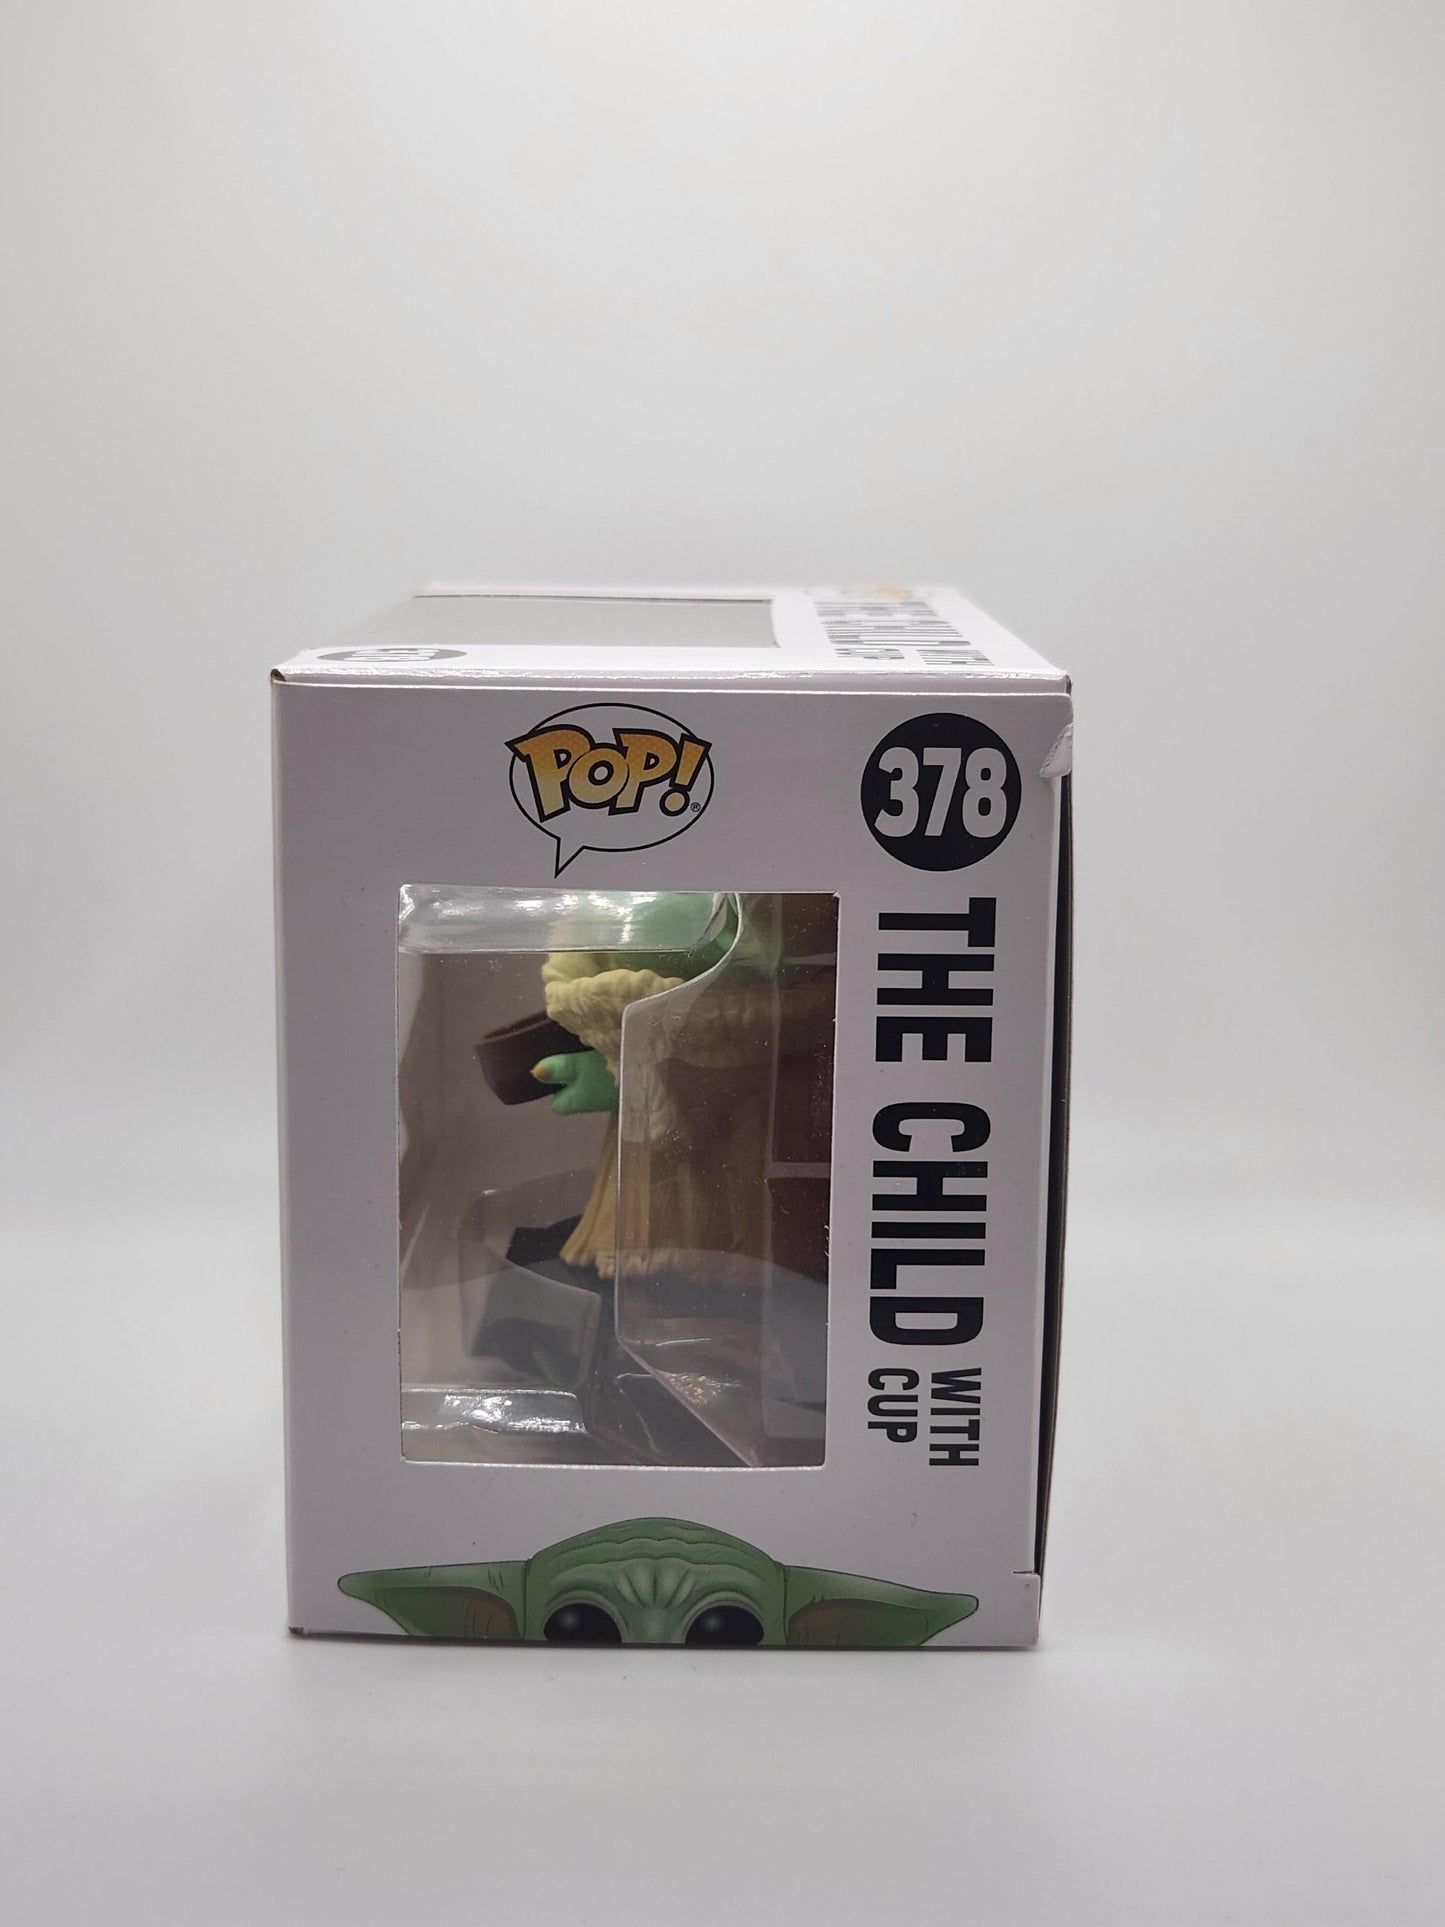 The Child (with Cup) - #378 - Box Condition 8/10